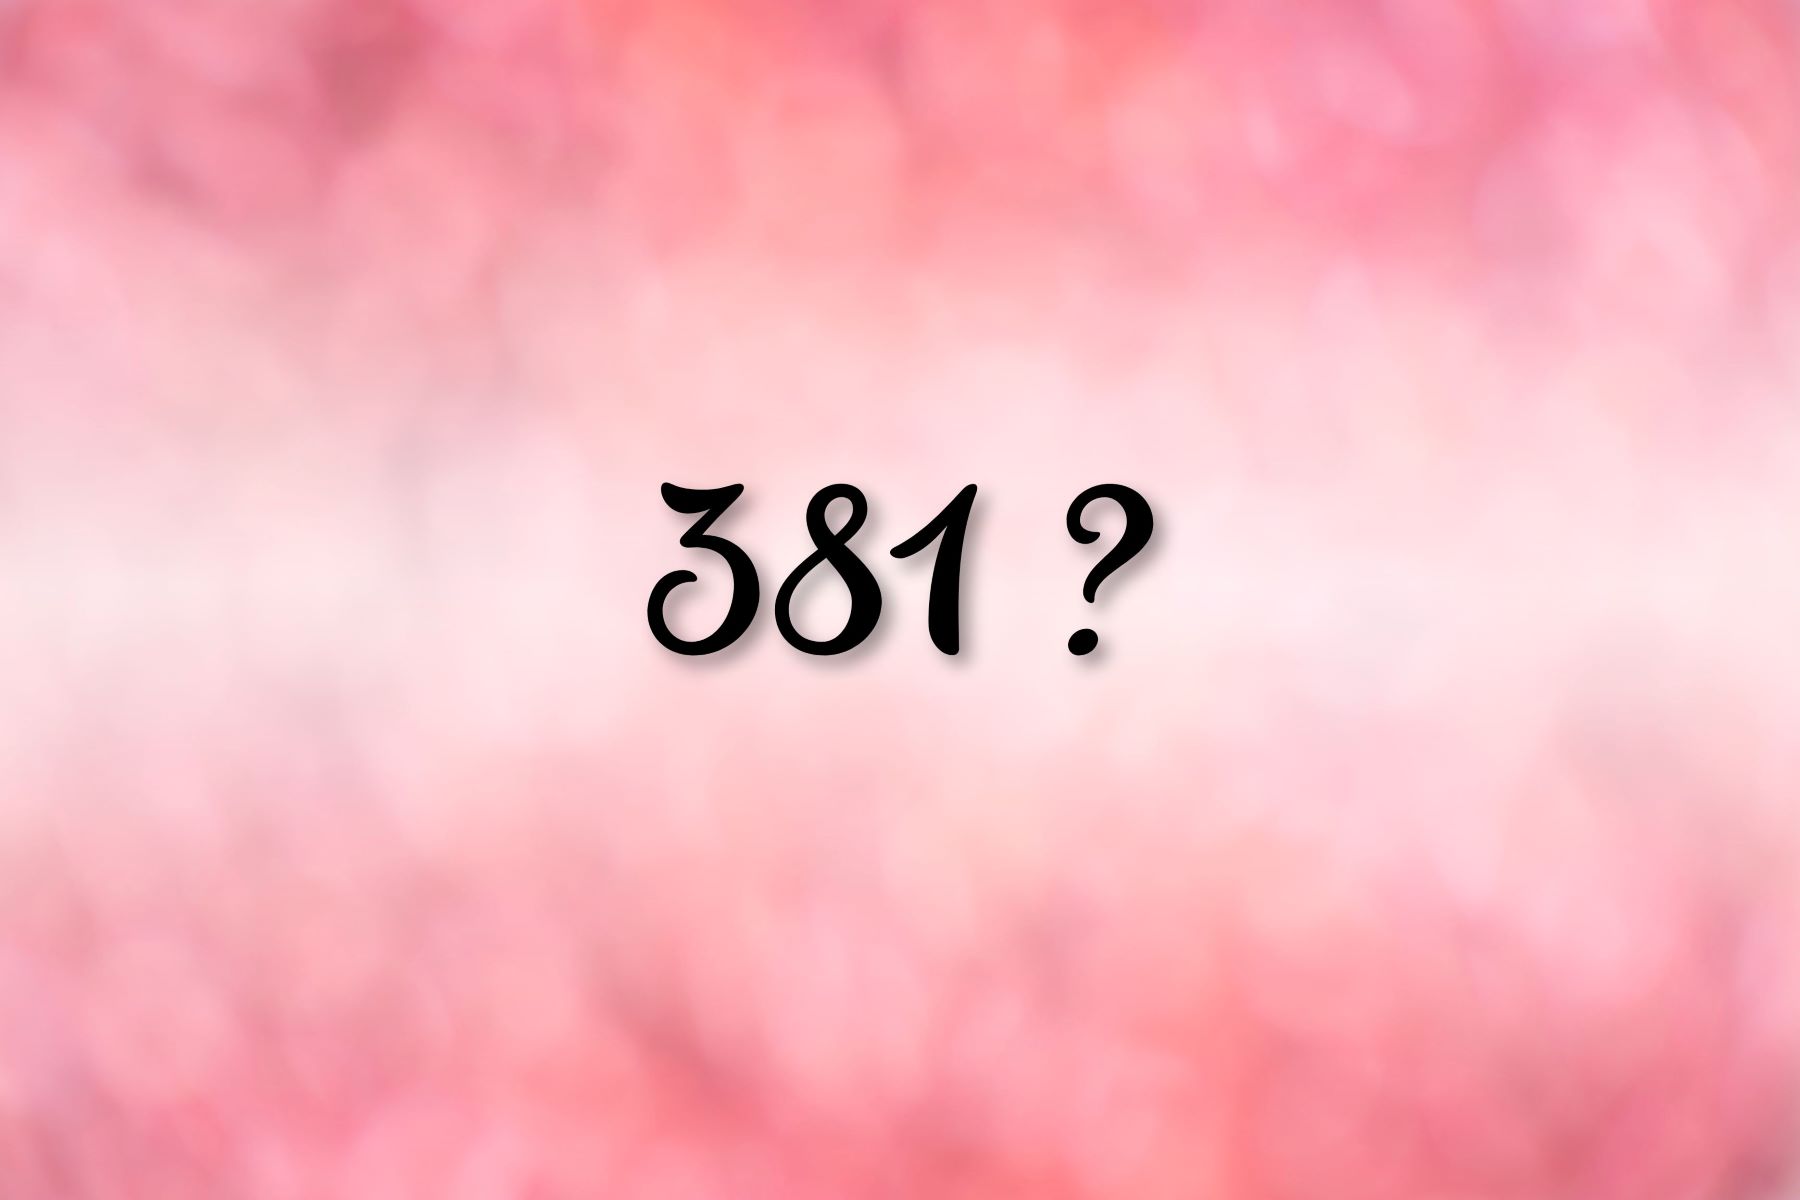 The Surprising Meaning Behind The Number '381' Will Blow Your Mind!